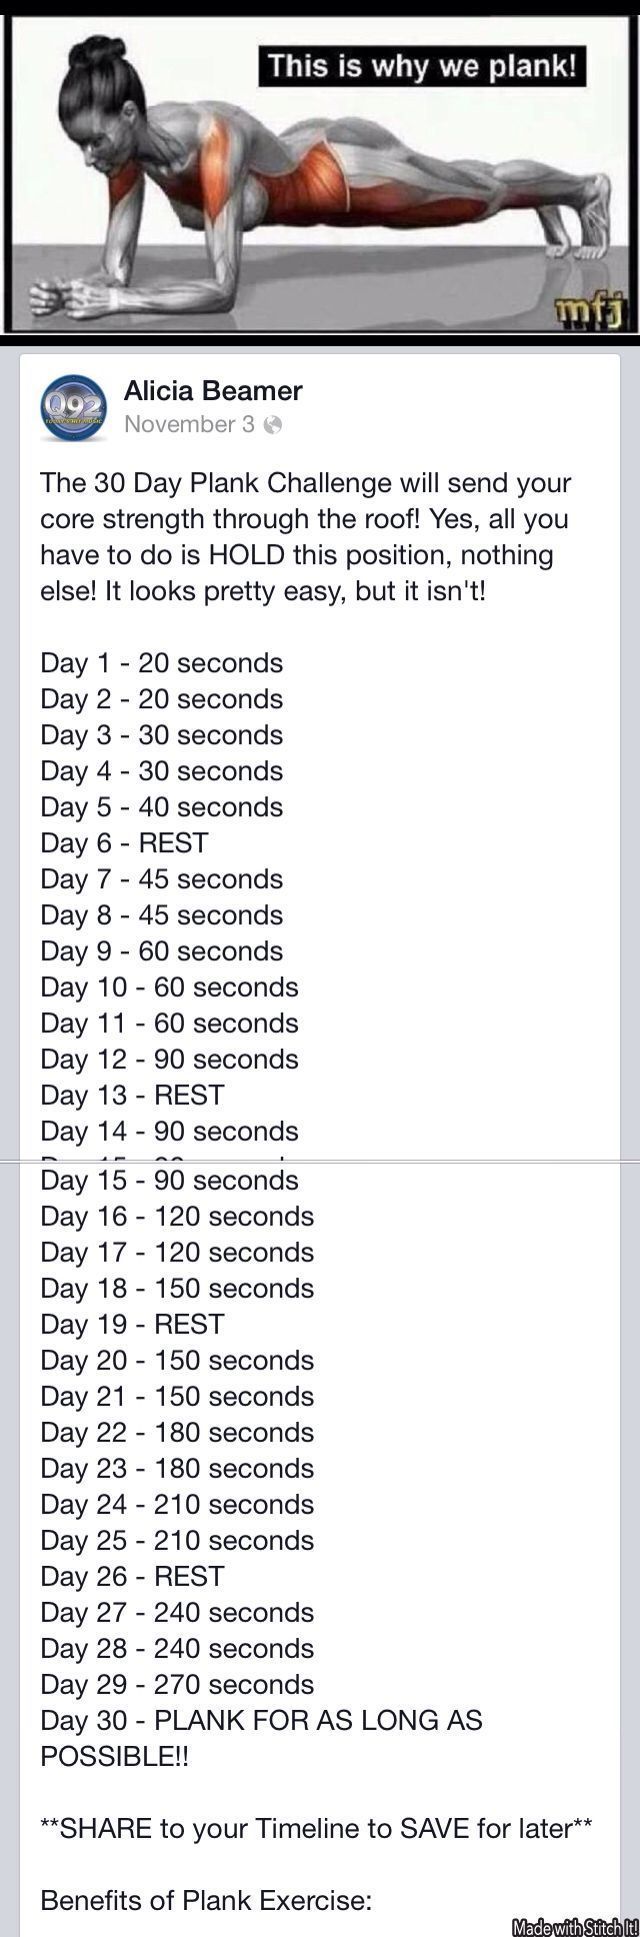 PLANK CHALLENGE- Looks easy, lets see how this works out